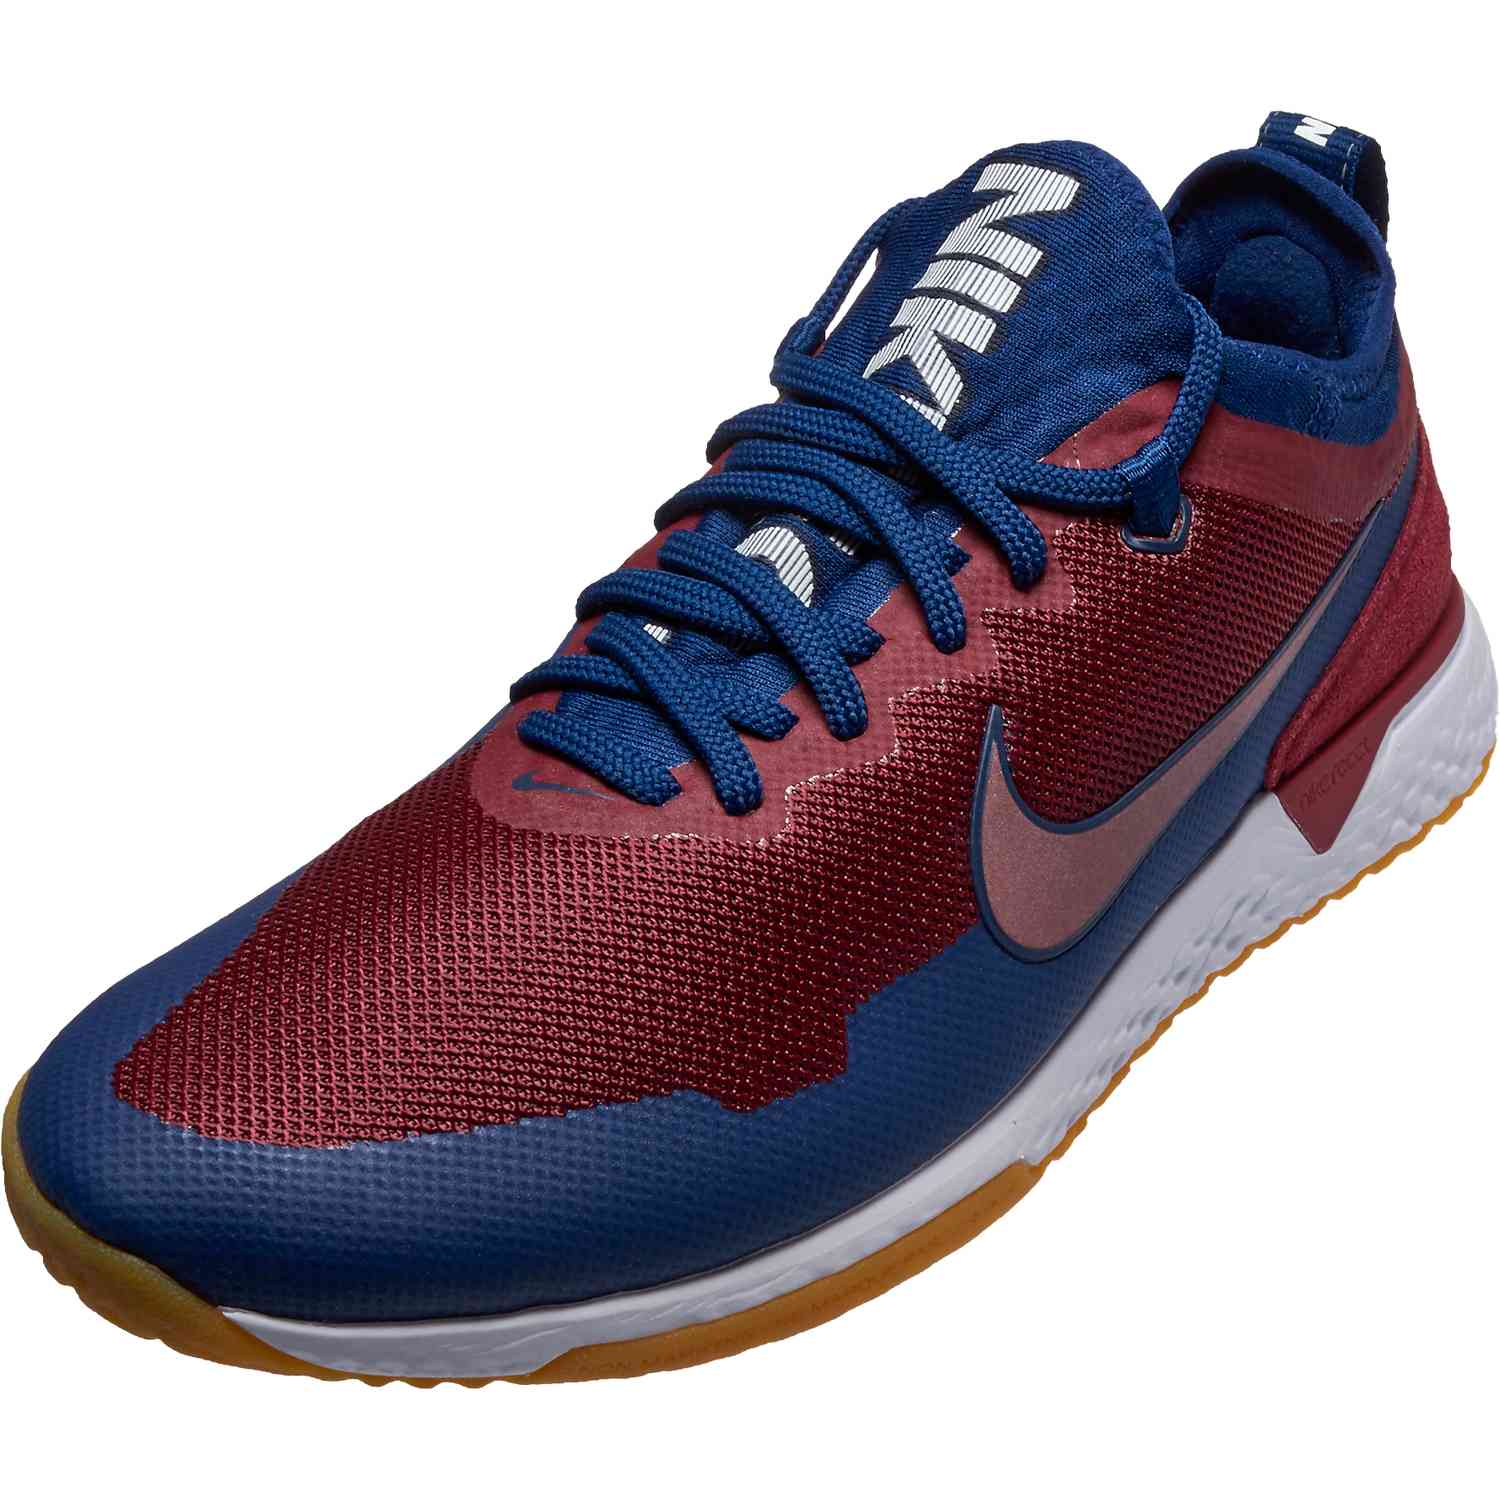 red white and blue nikes